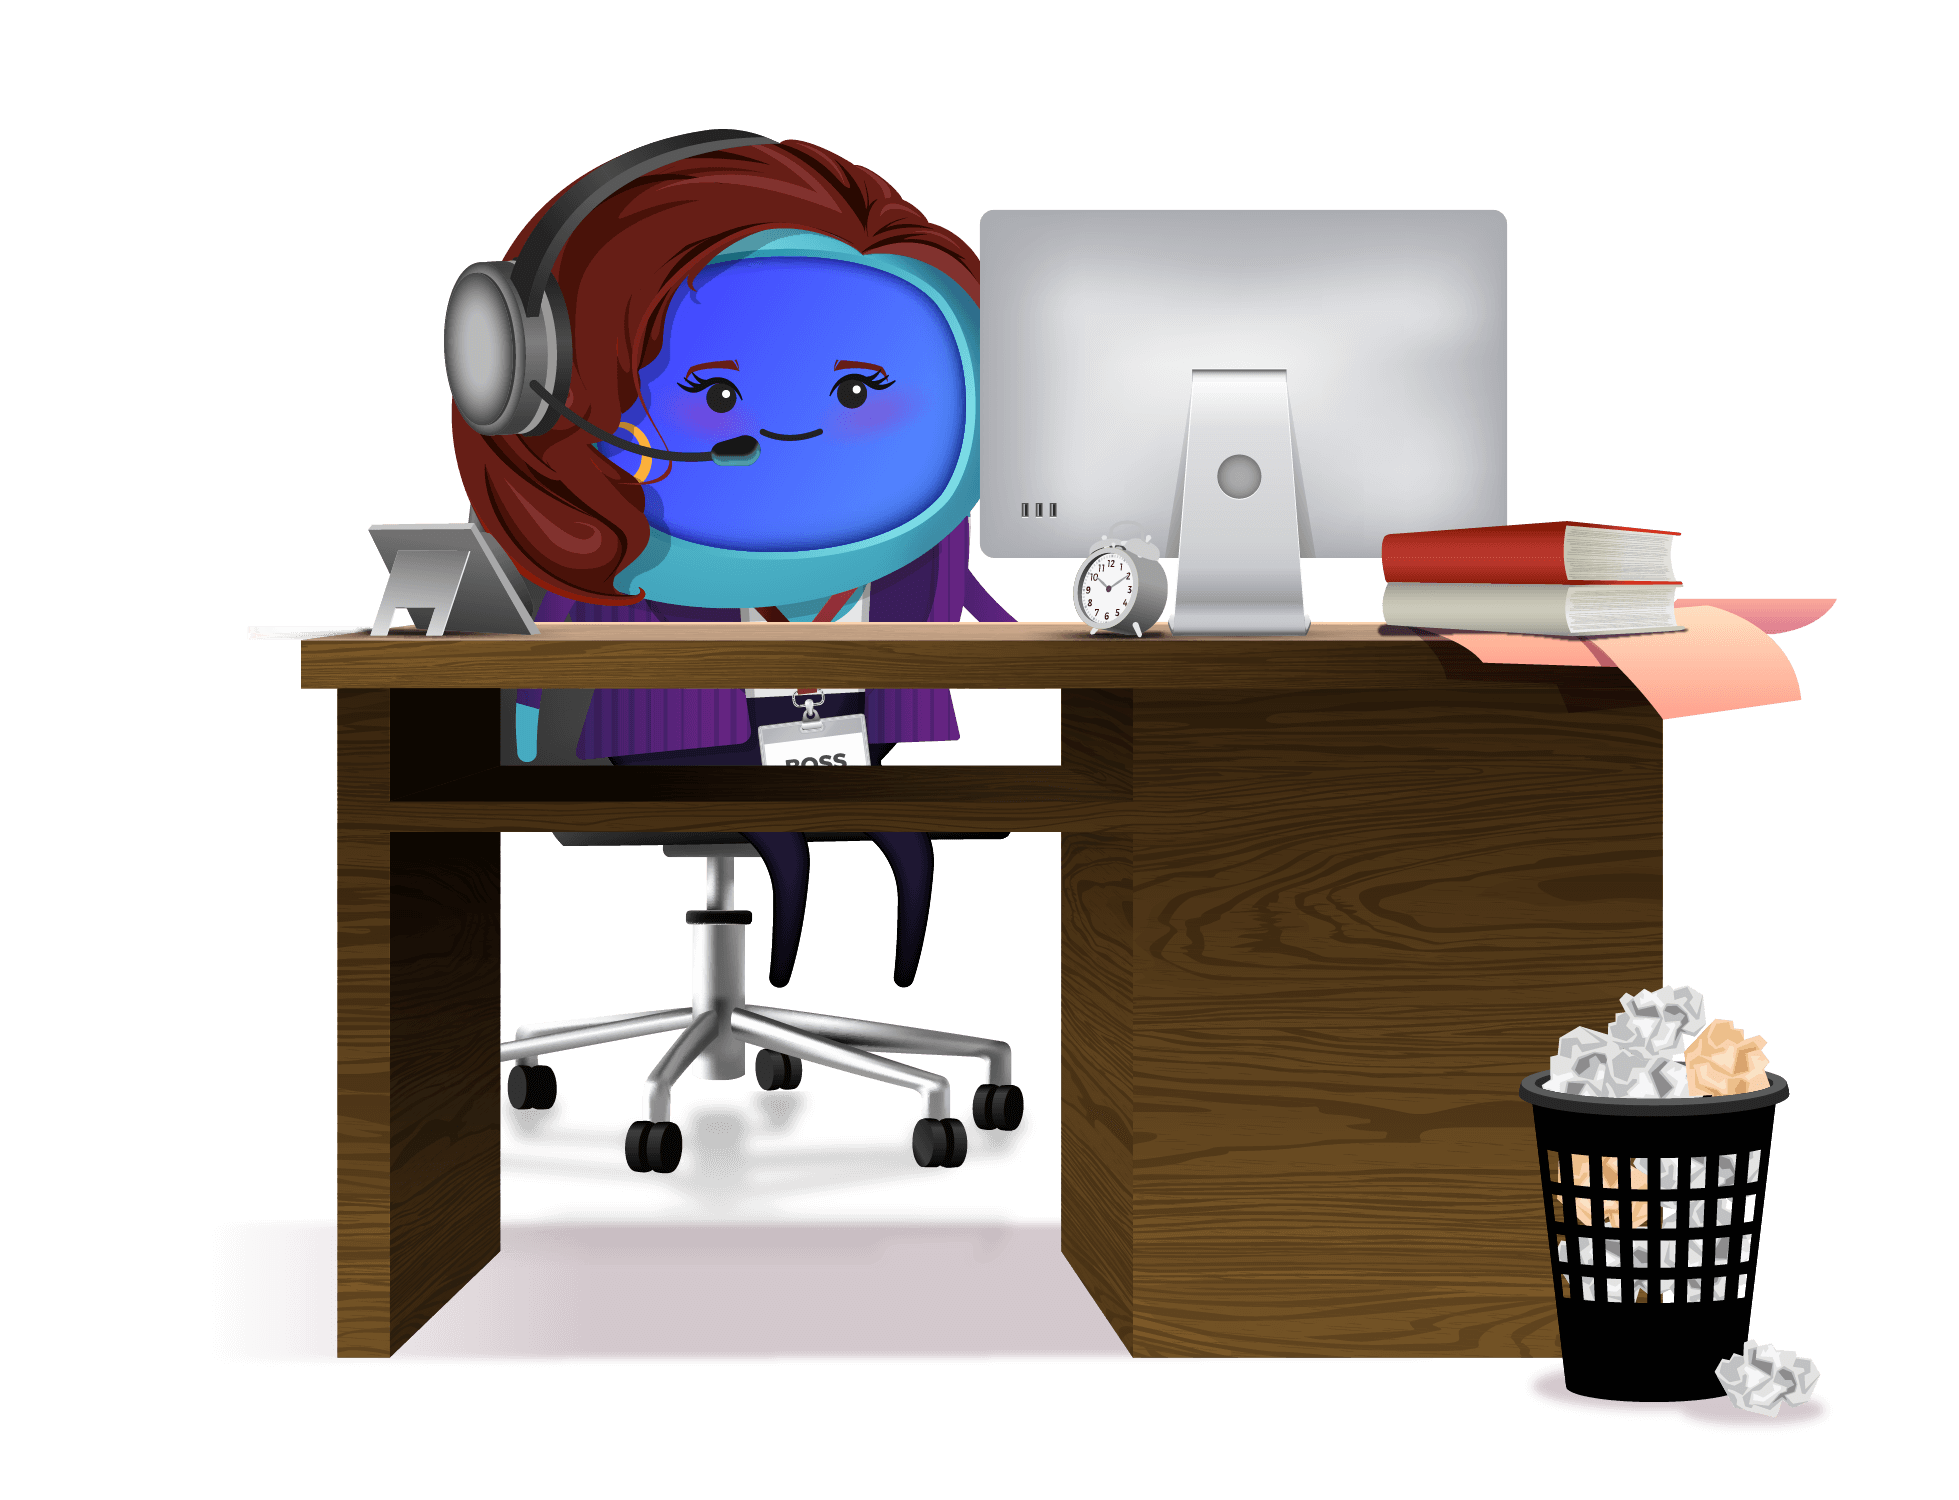 A character sitting at an office desk in front of a computer ready to answer questions